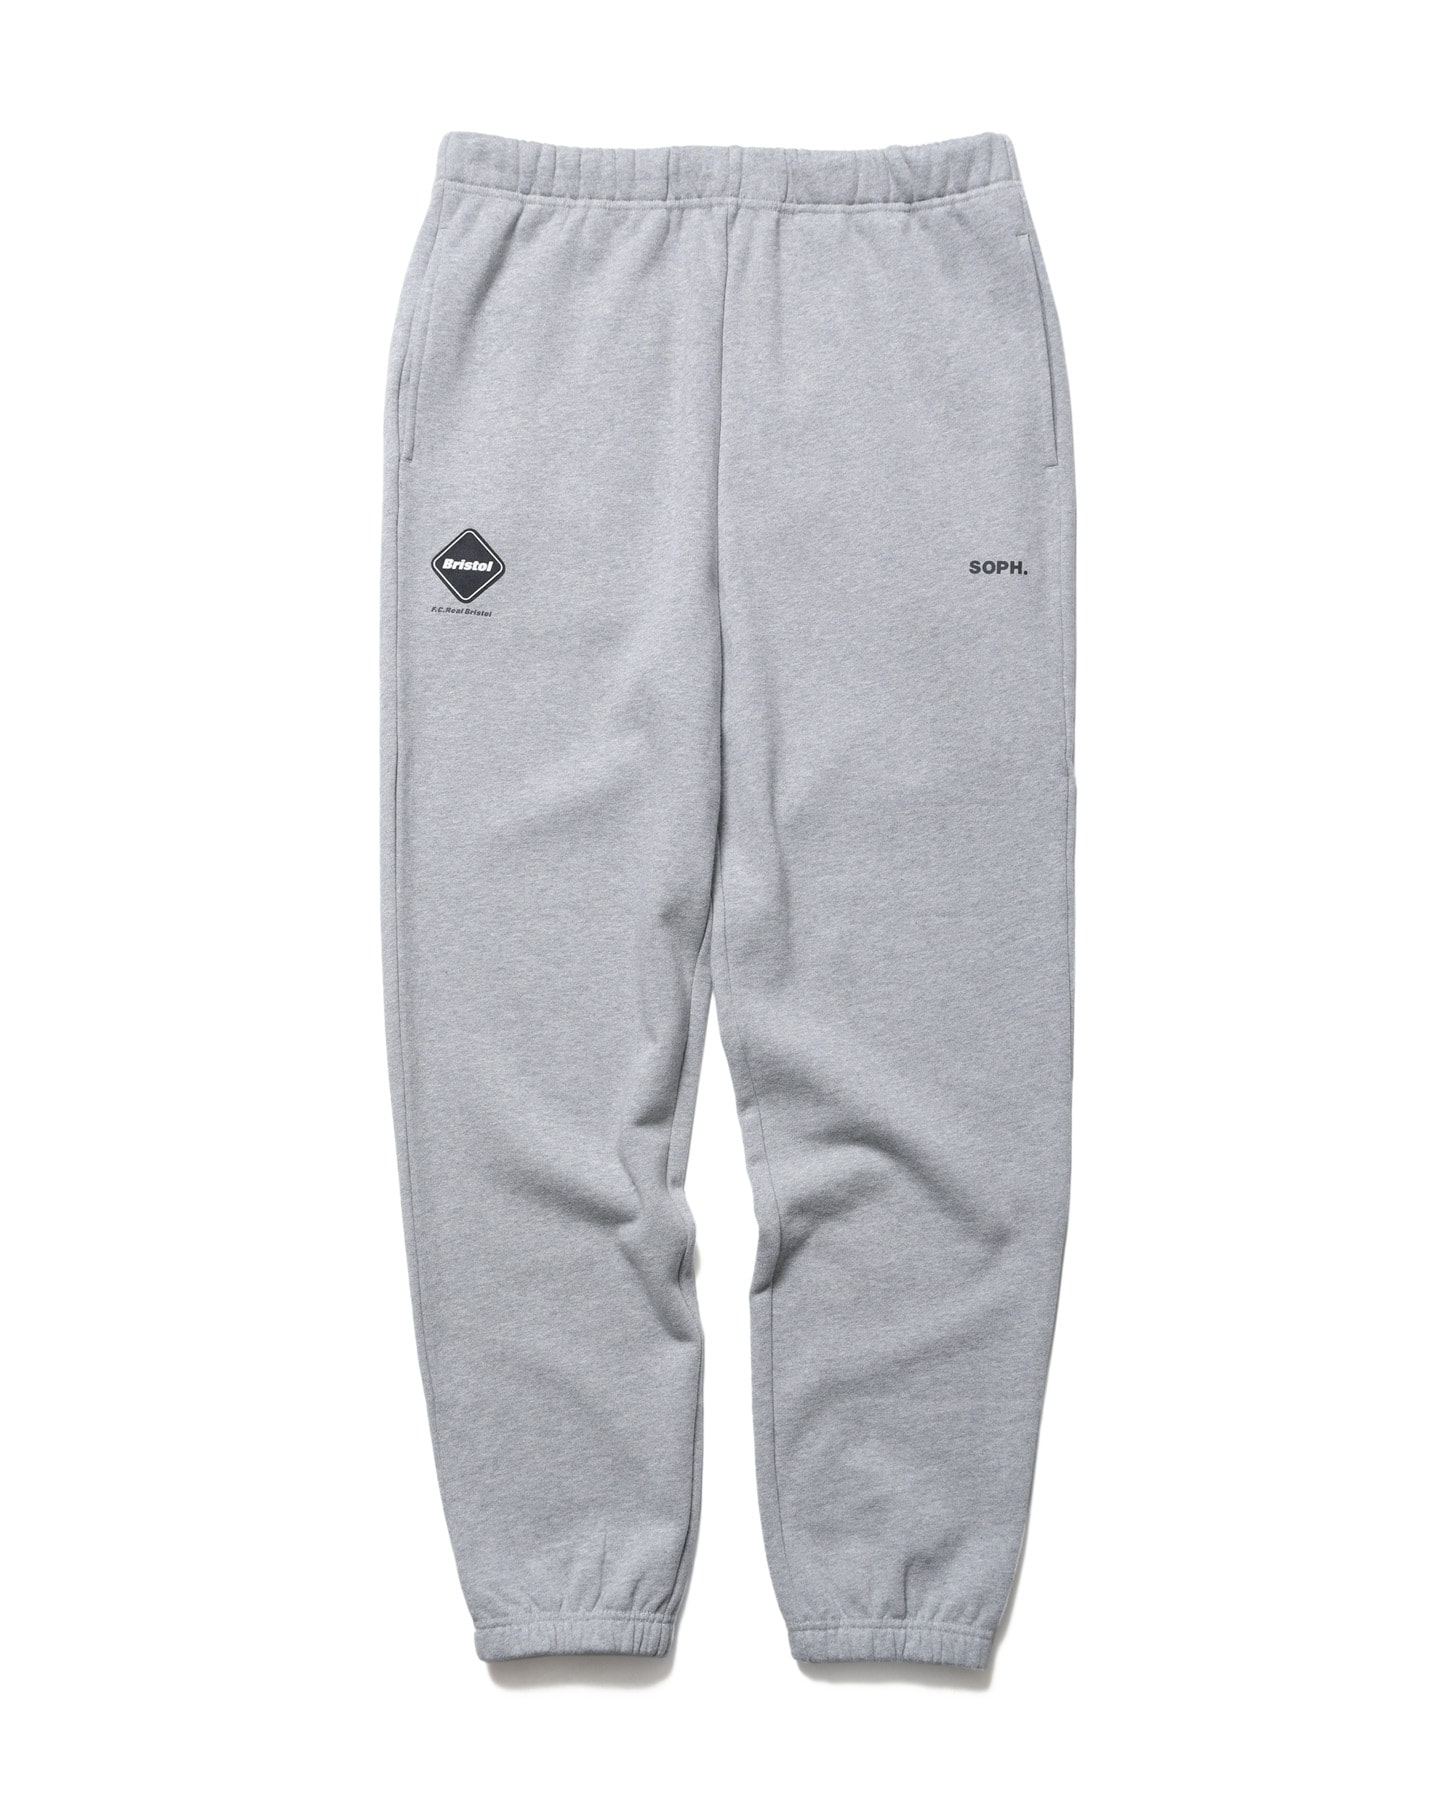 FCRB  23AW TEAM SWEAT PANTS  新品タグ付匿名発送致します